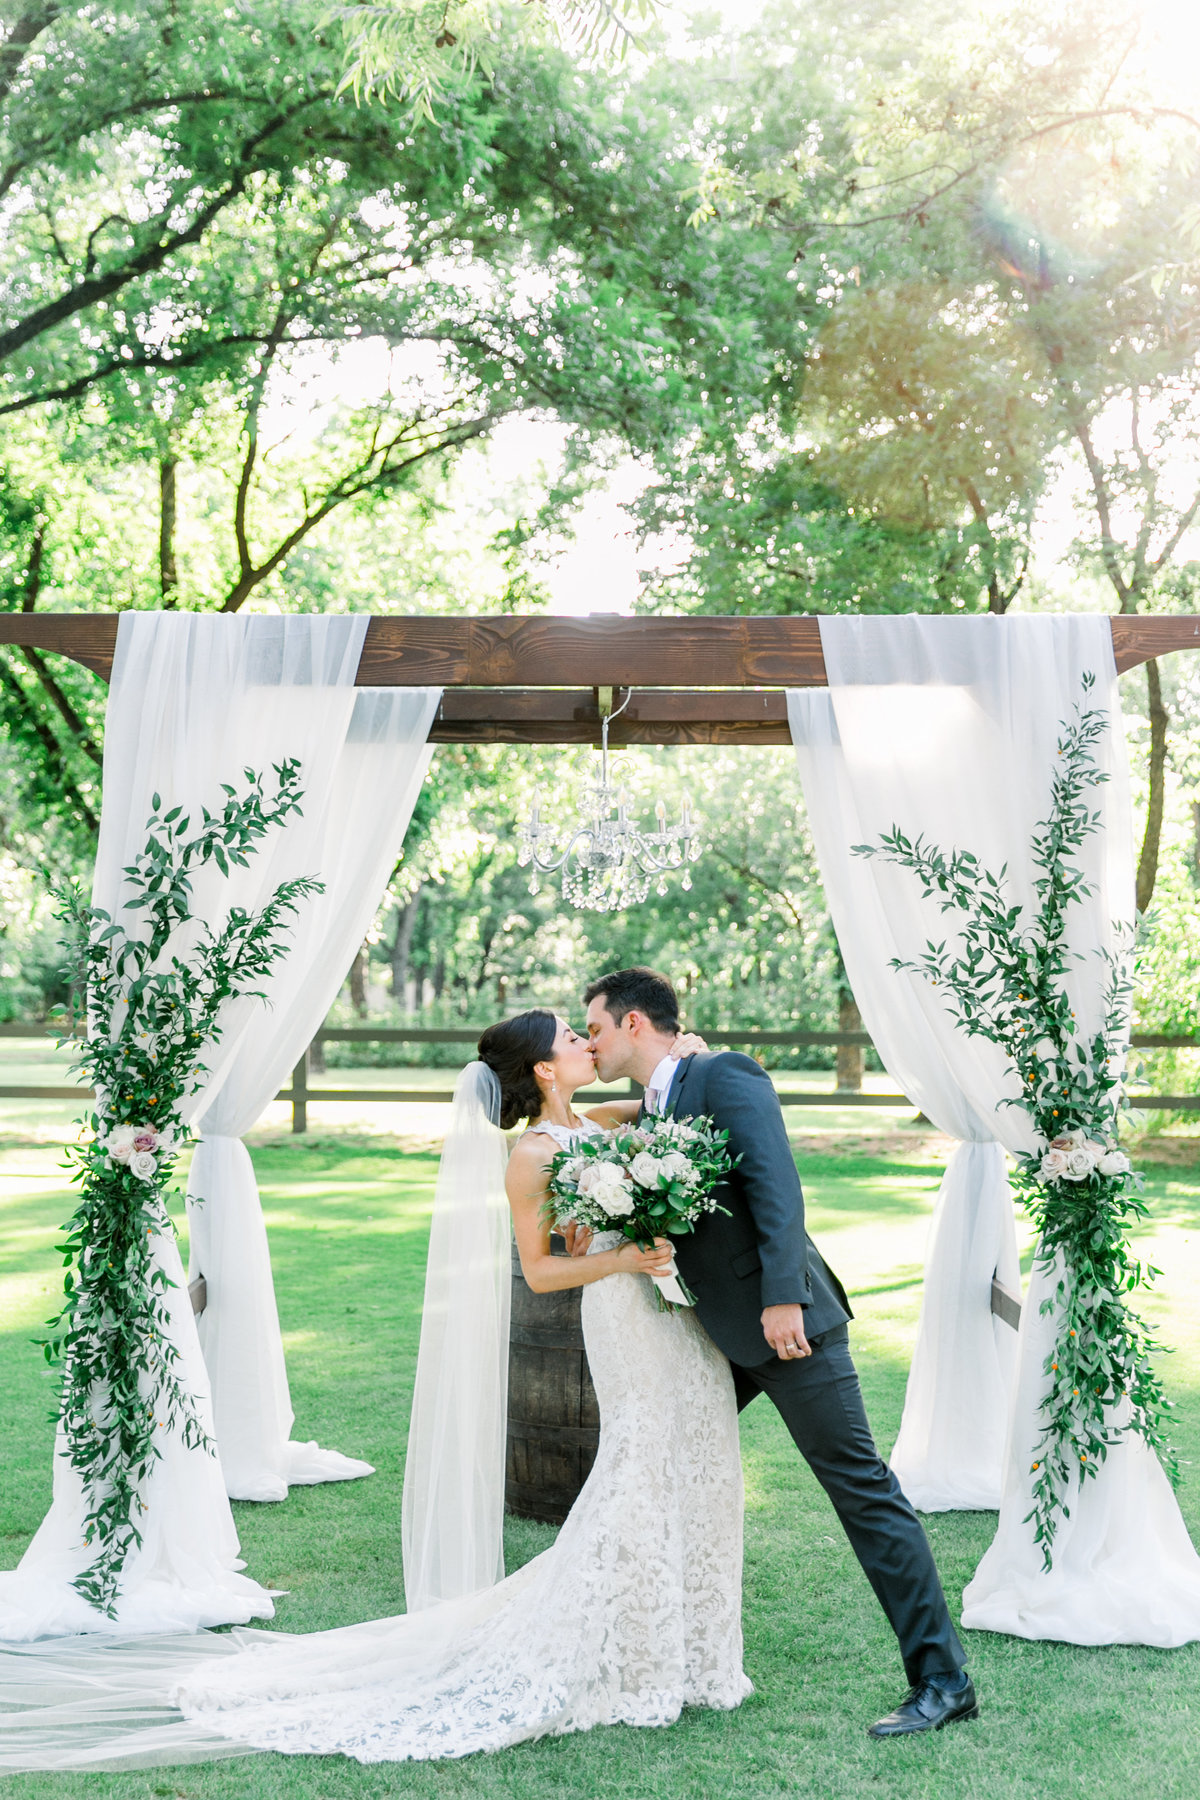 Karlie Colleen Photography - Venue At The Grove - Arizona Wedding - Maggie & Grant -68